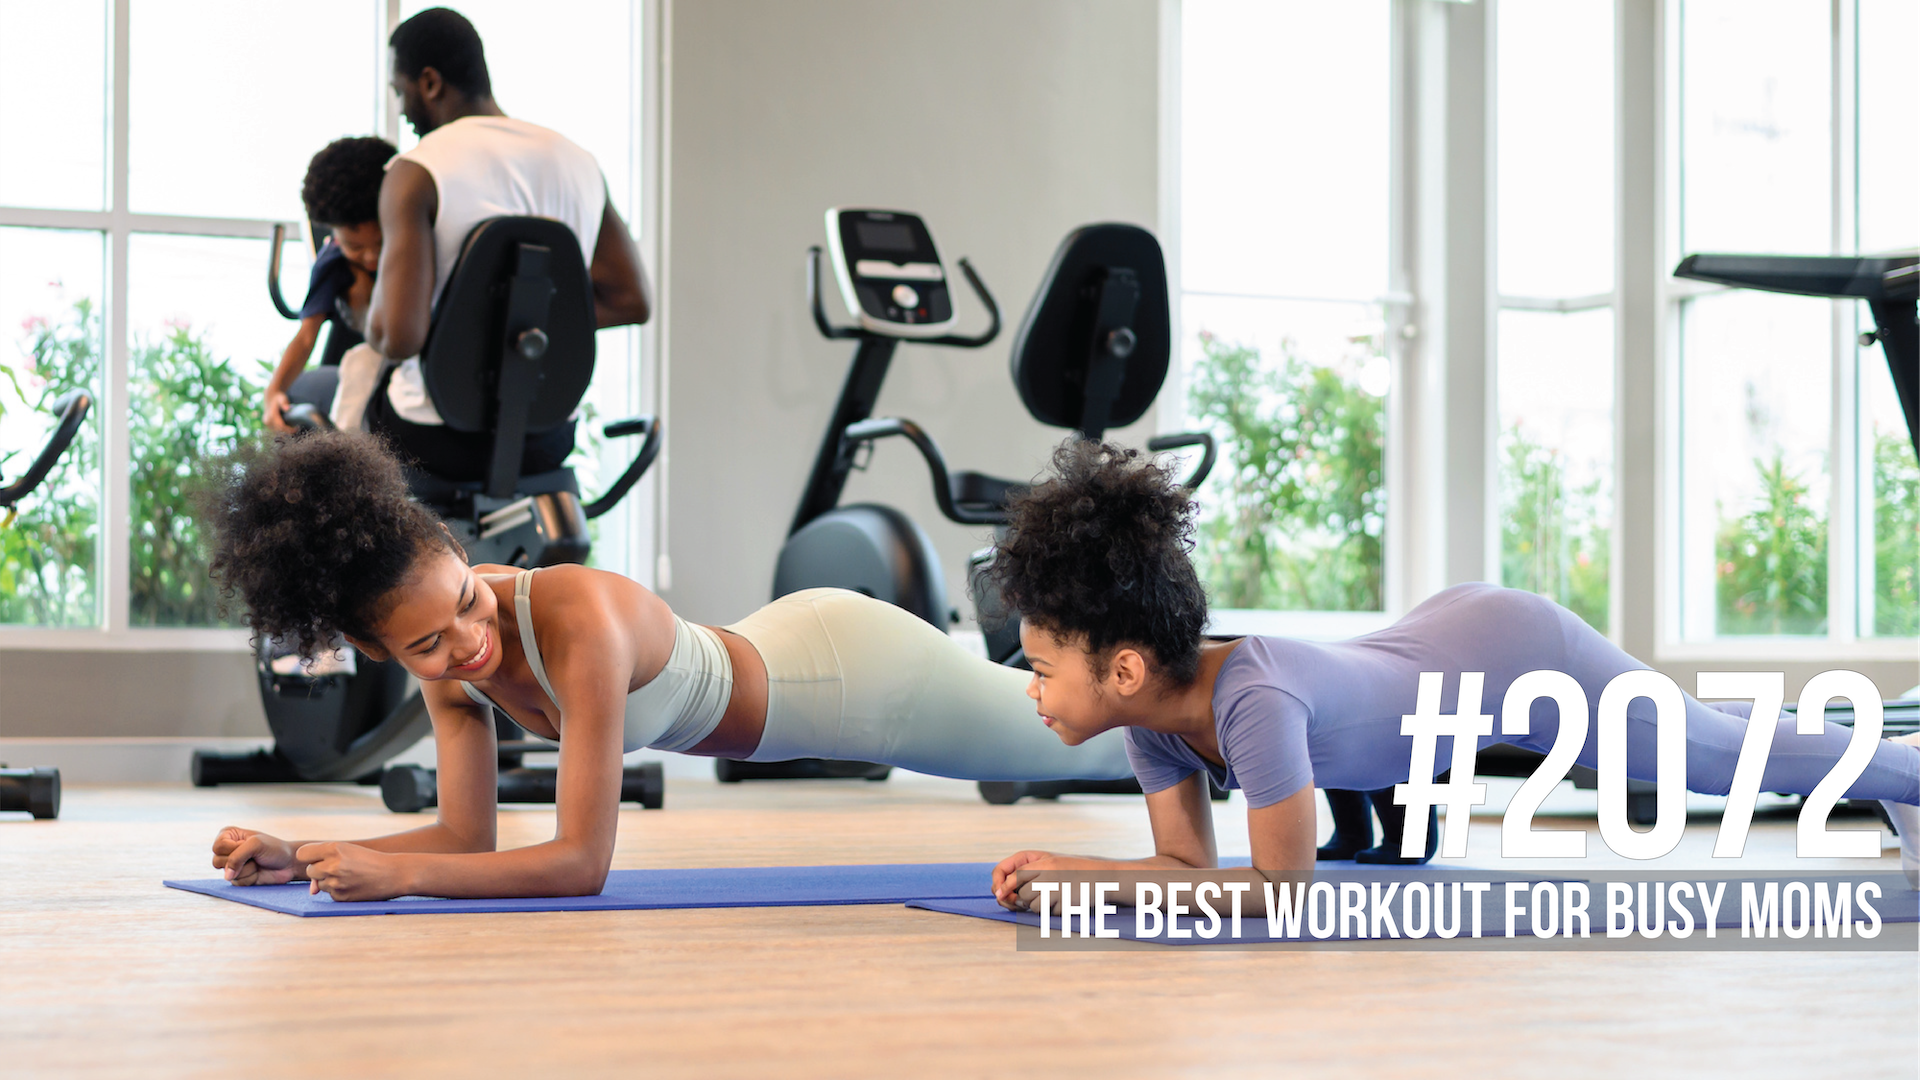 2072: The Best Workout for Busy Moms